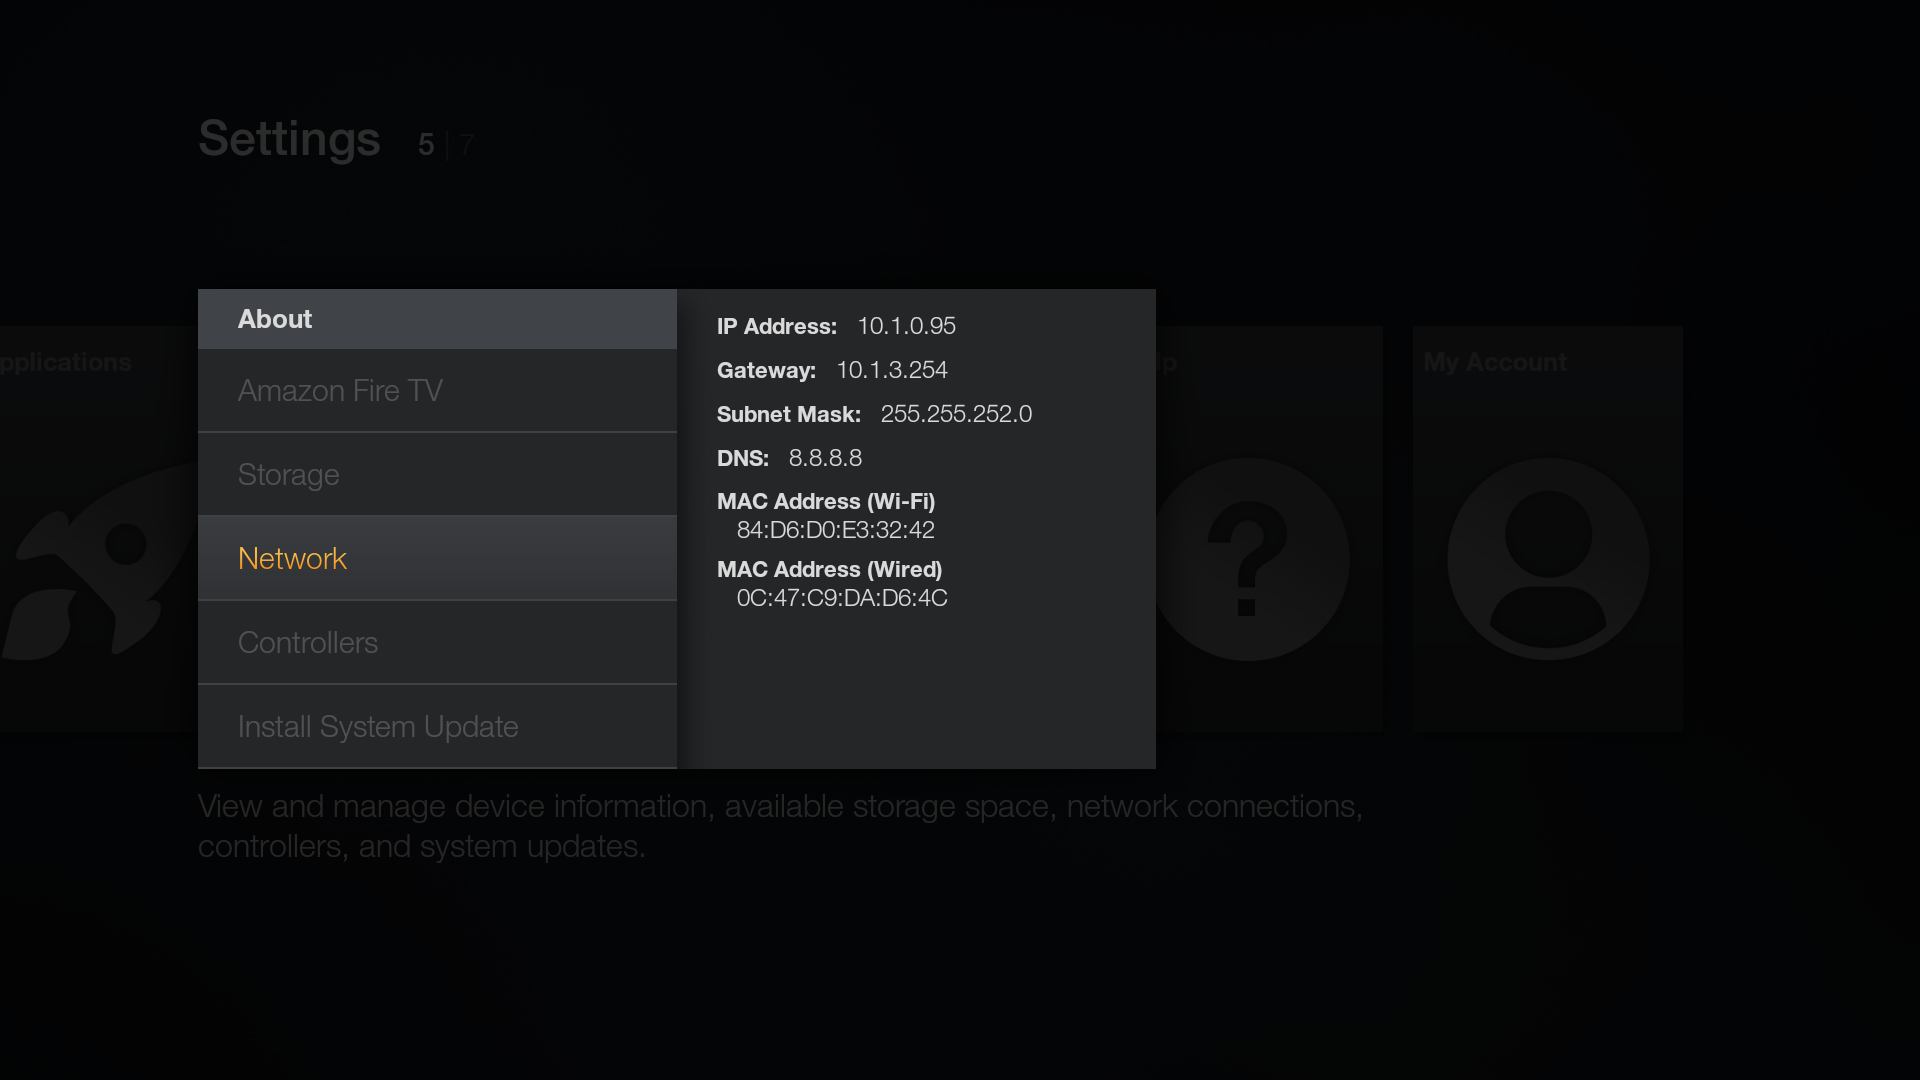 Get the IP of Fire TV